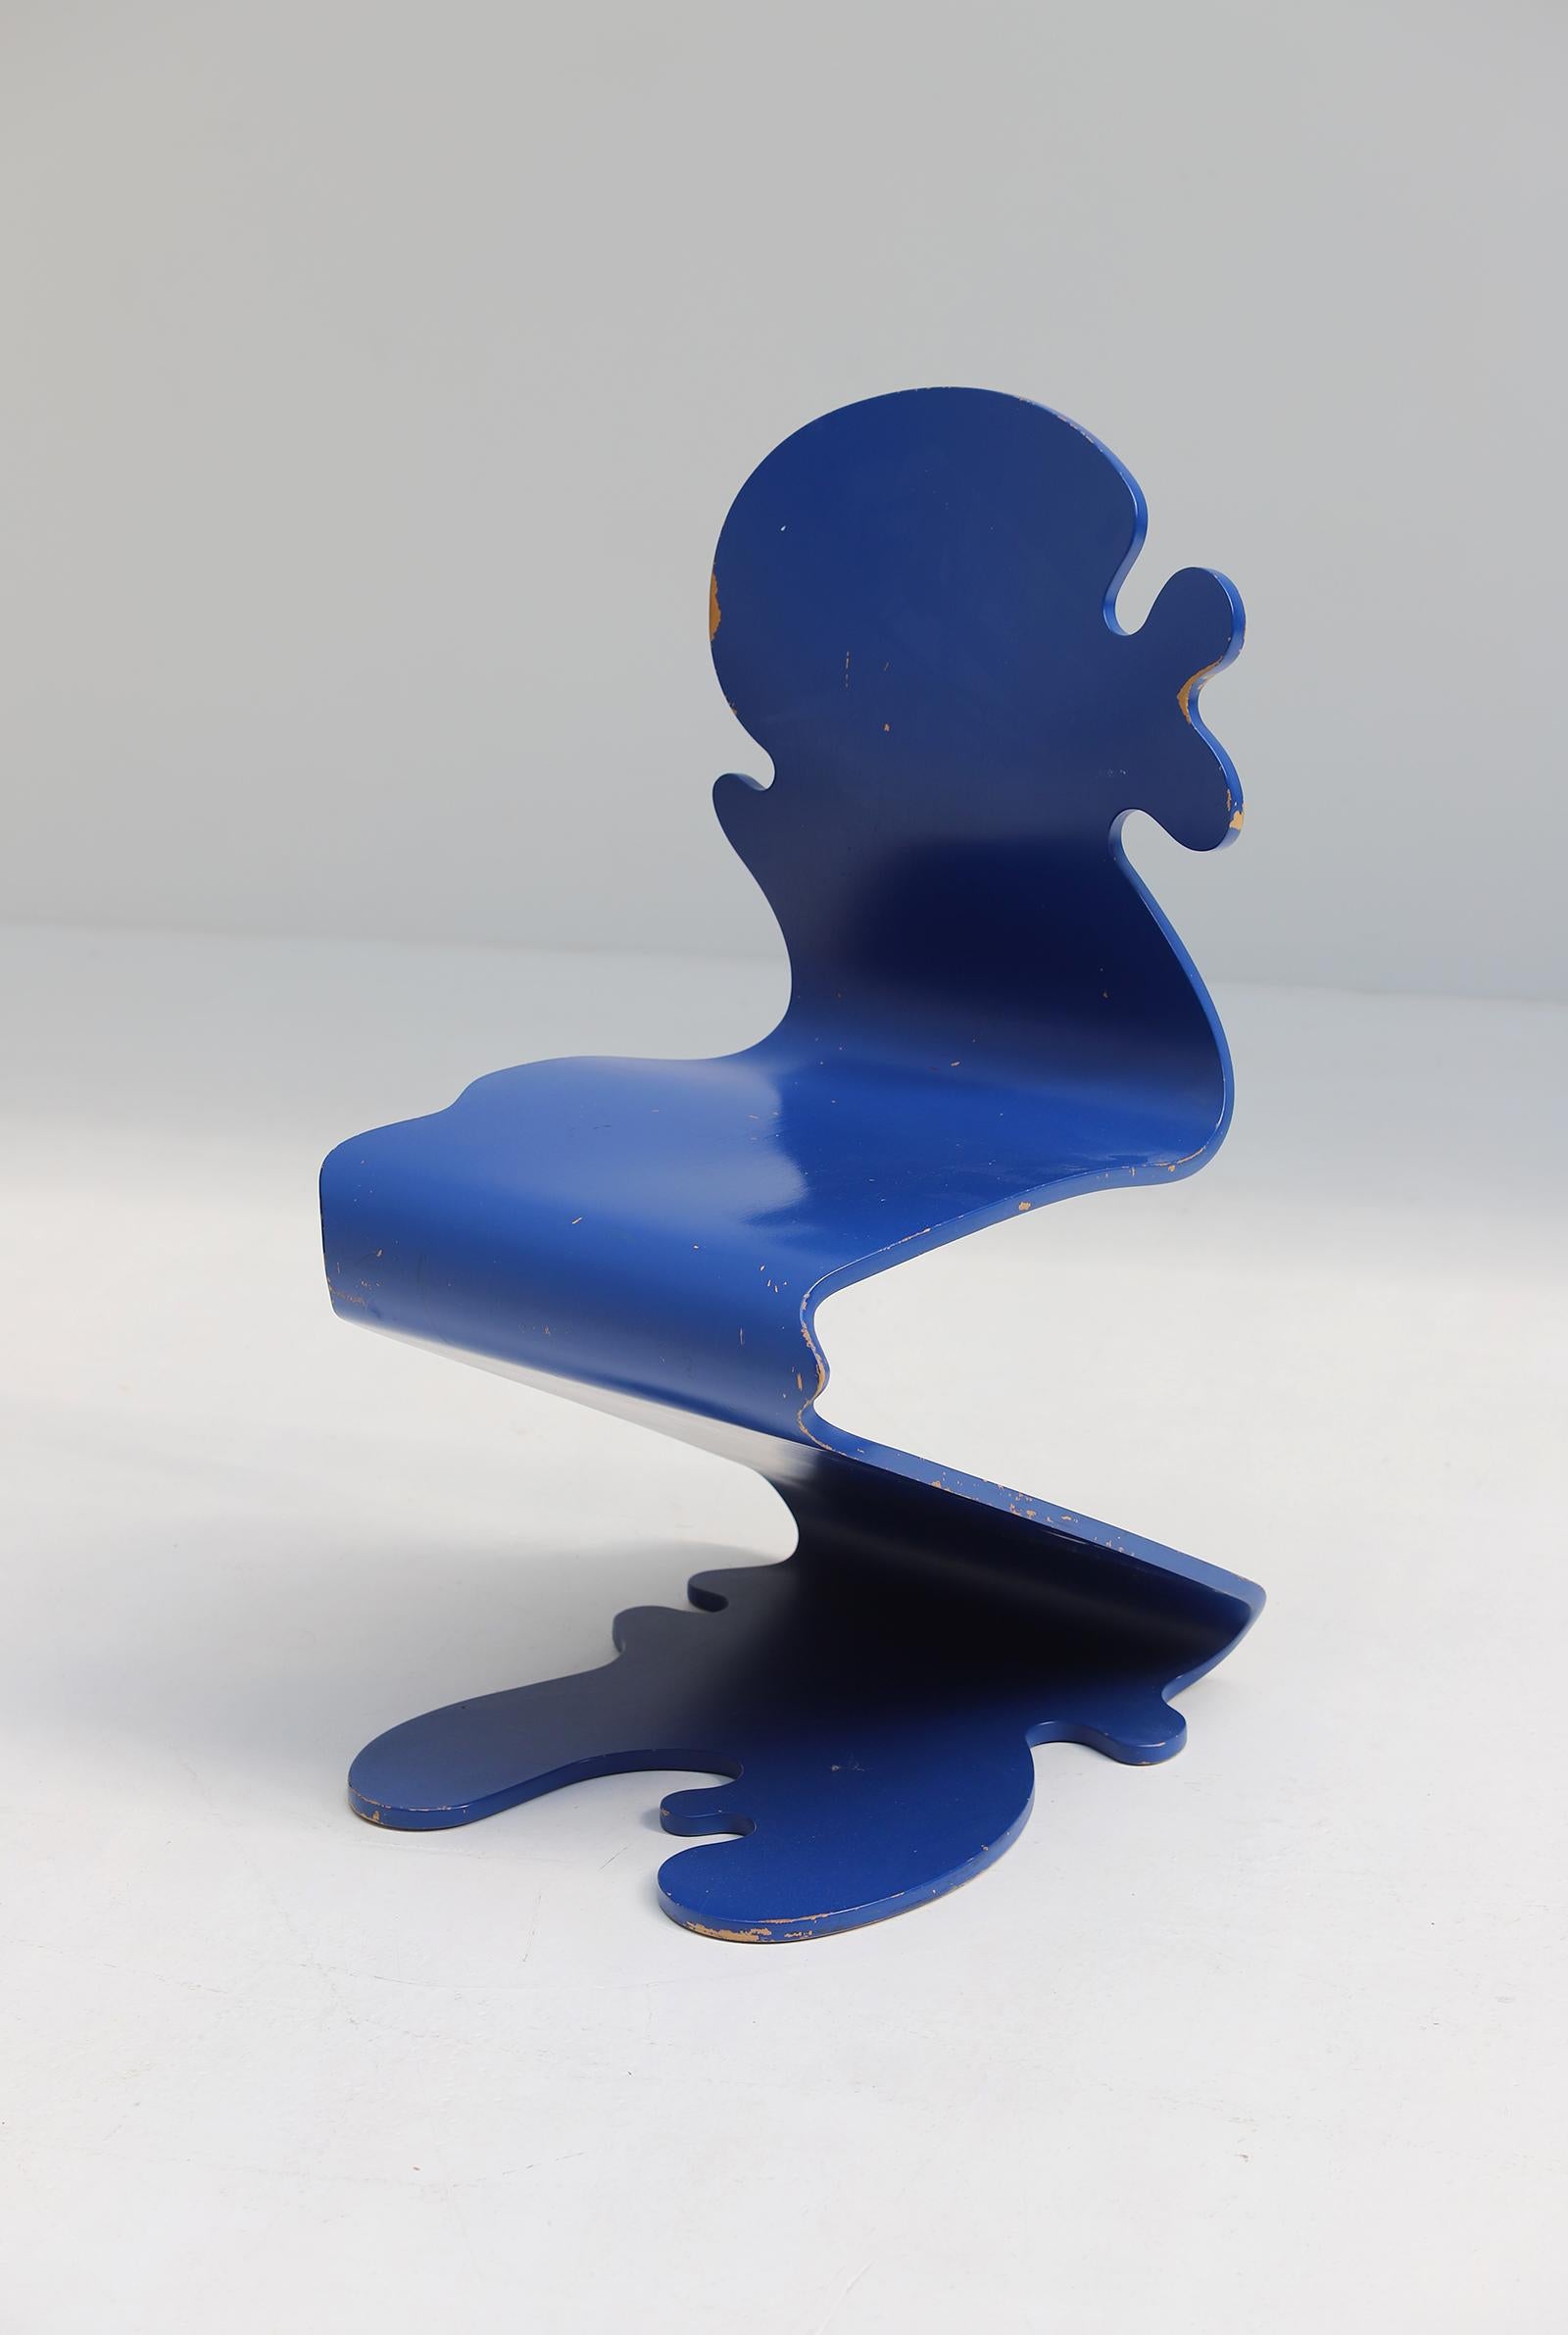 Danish designer Verner Panton is well known for his color- and playful designs. This cantilevered side chair, called pantonic 5010 Chair, is part of a 3-parts collection. (pantonic 5000 - pantonic 5020) The chair is designed in 1992 for studio HAG,